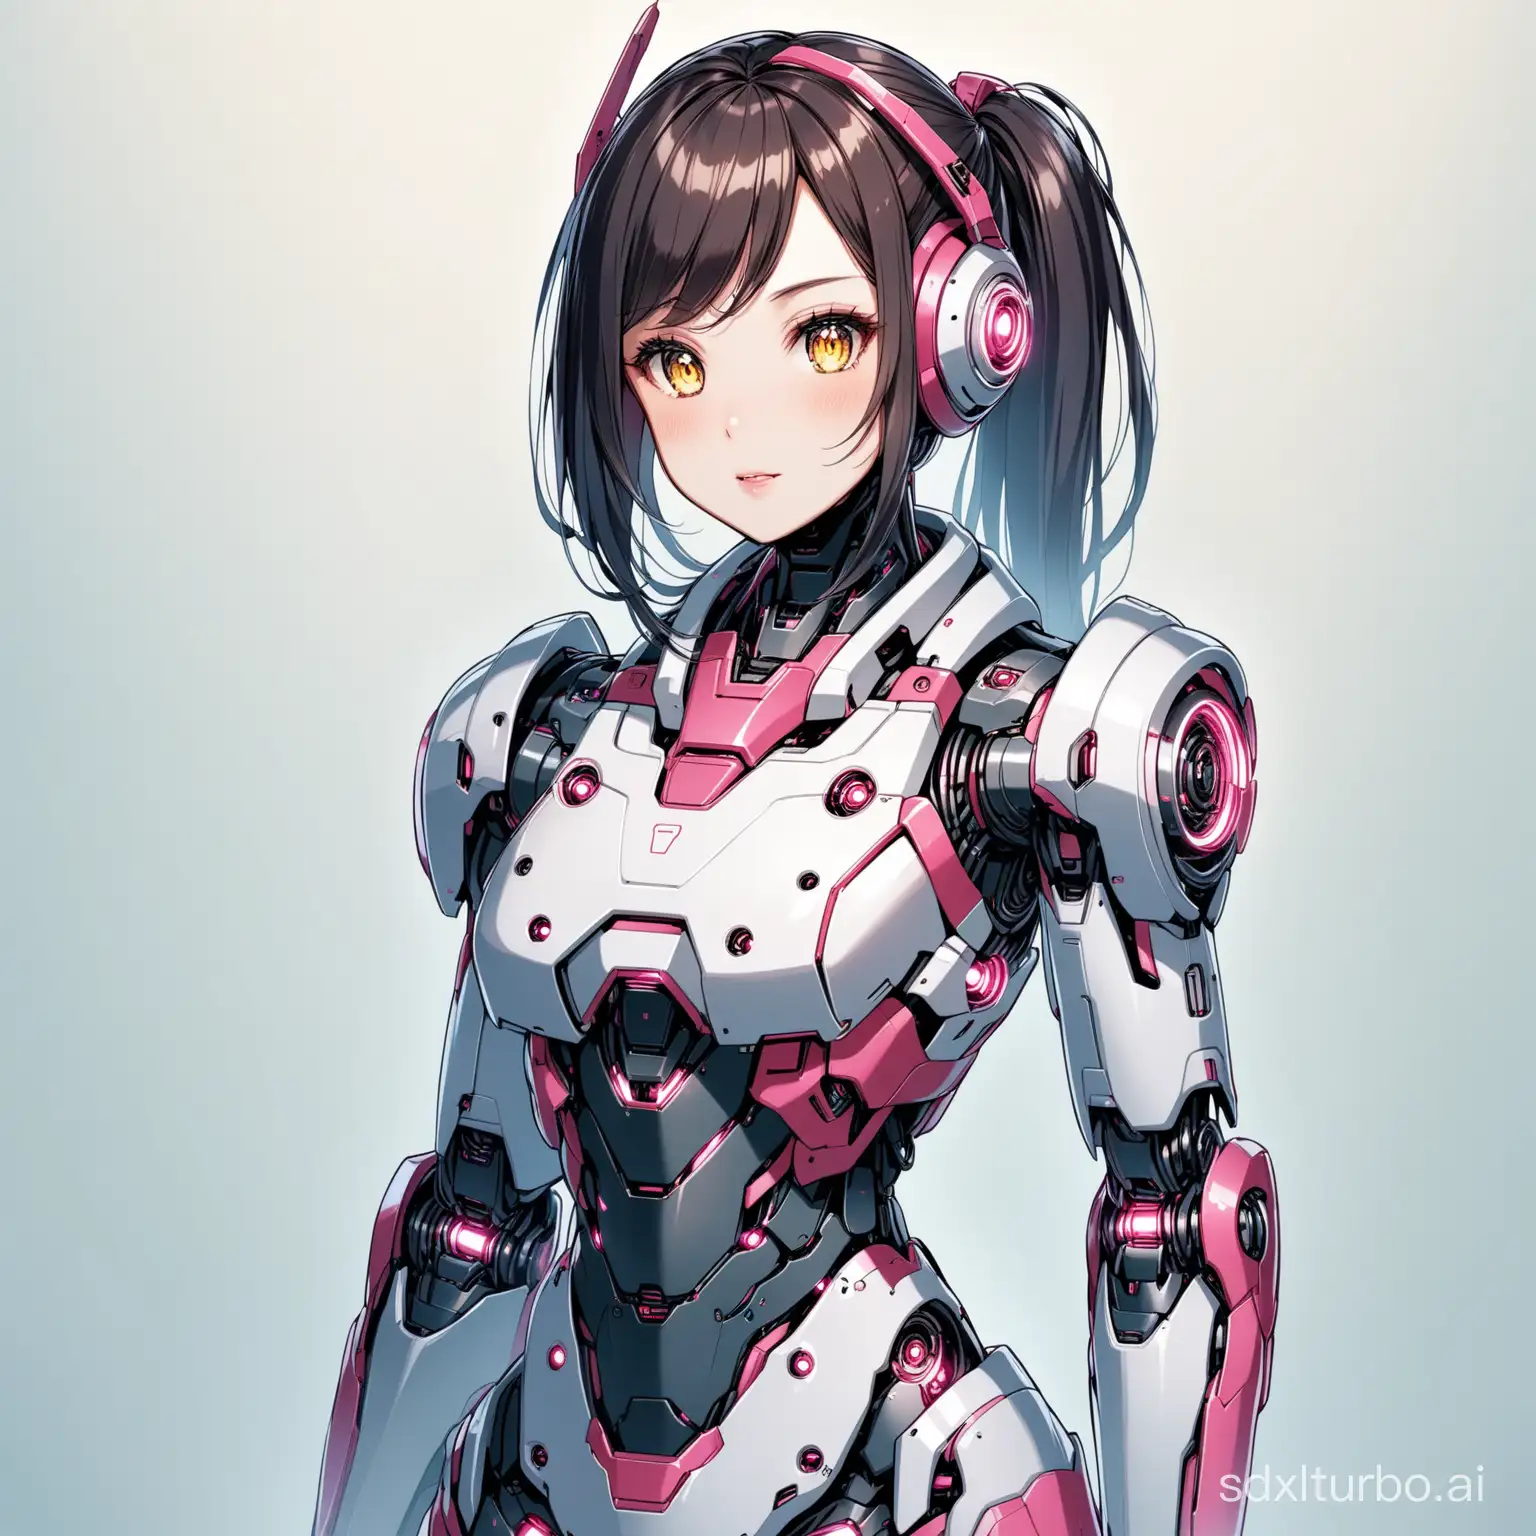 Futuristic-Robot-Girl-with-Metallic-Features-and-Neon-Glow